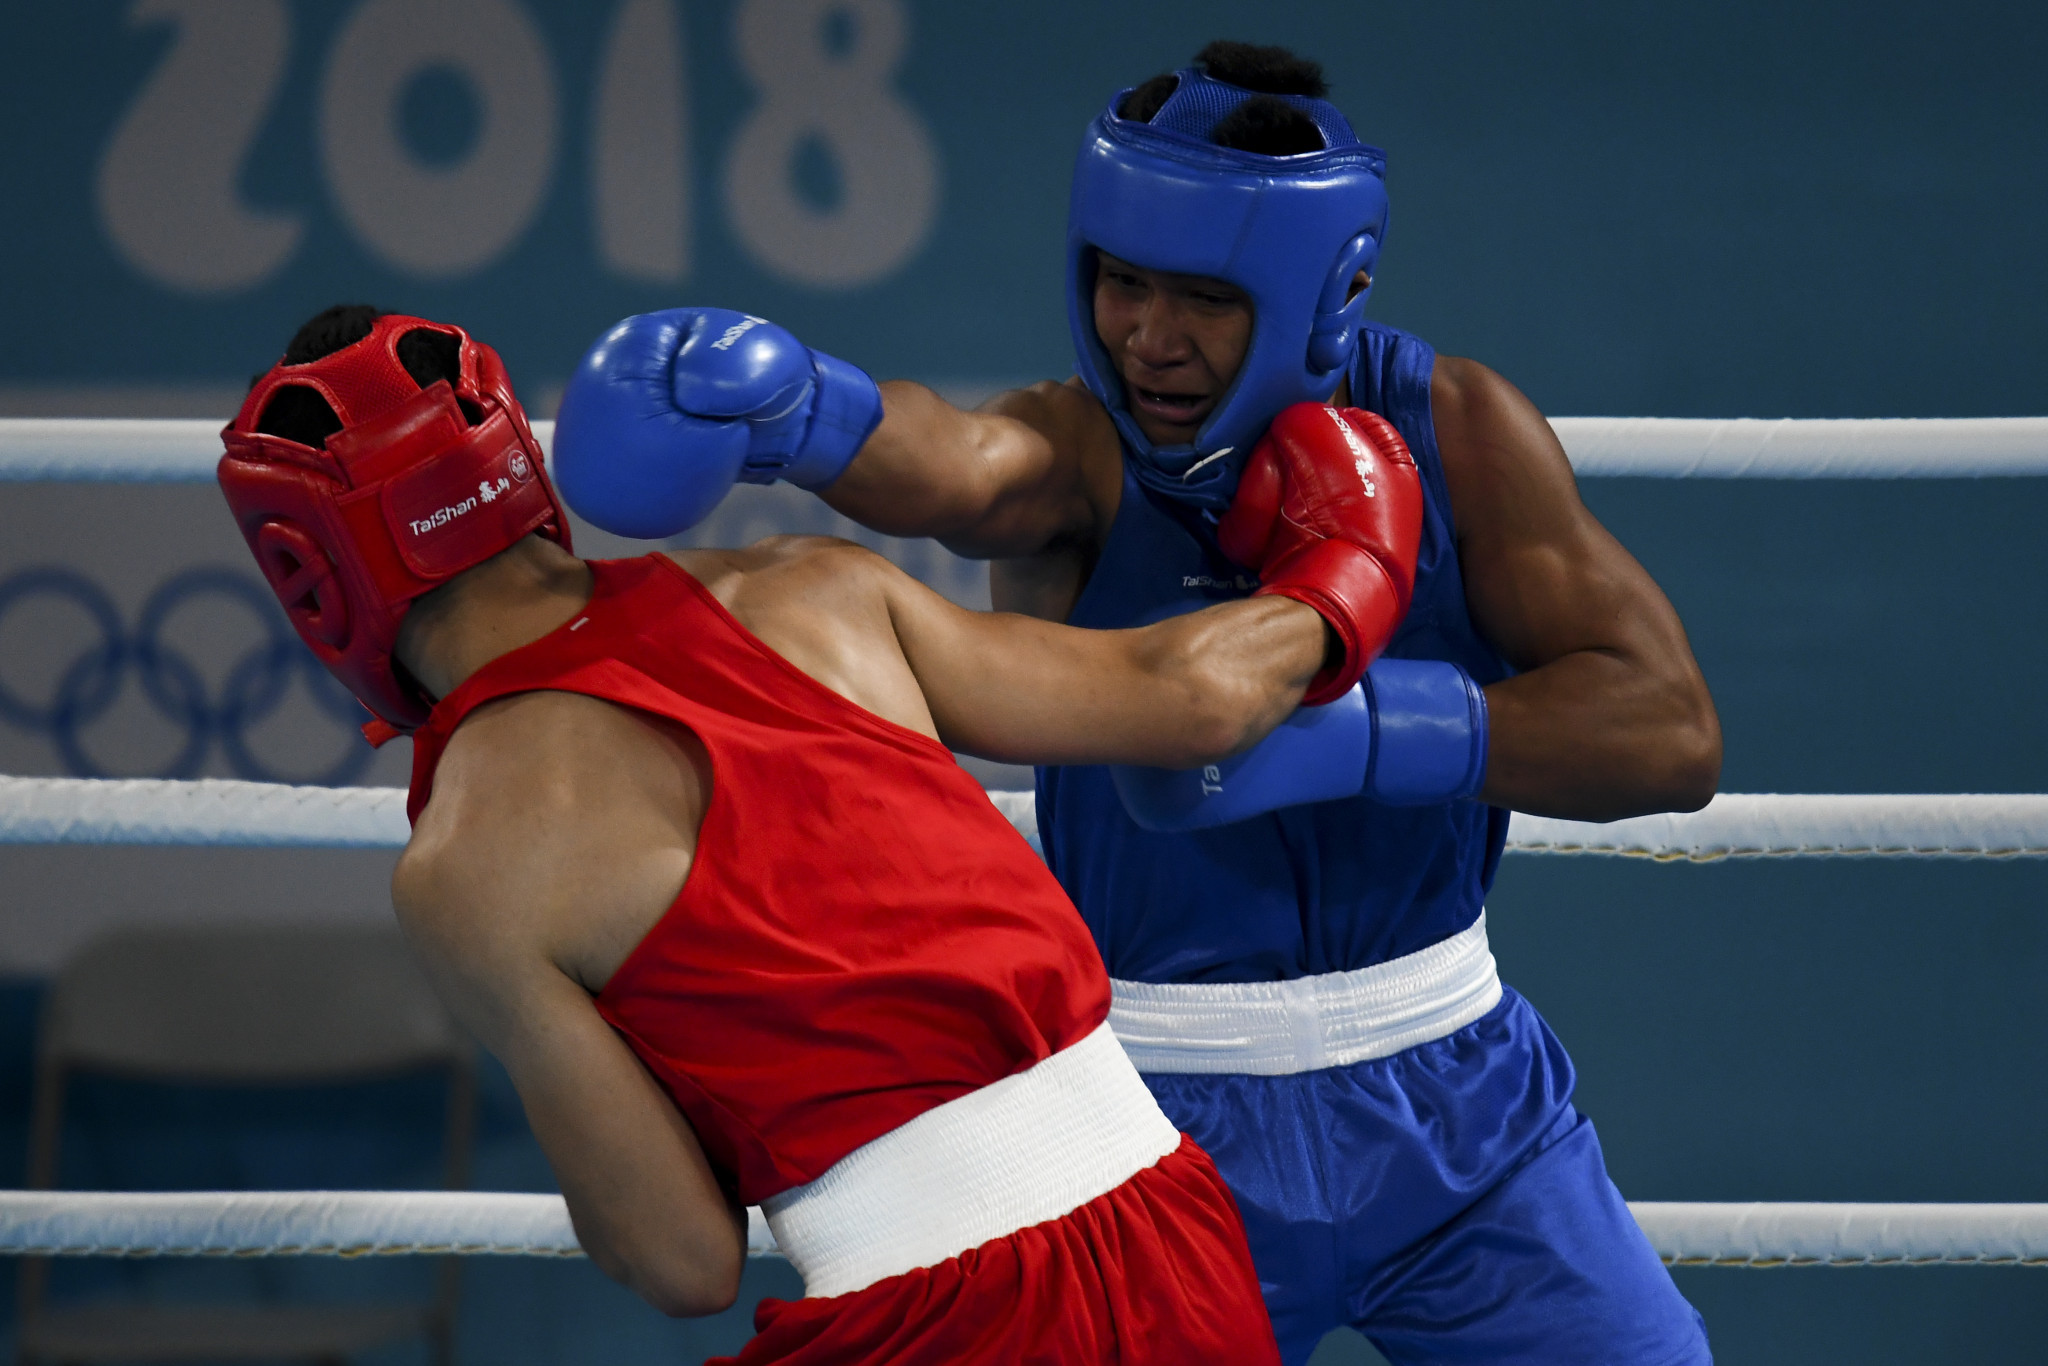 IOC sports director confident boxing at Buenos Aires 2018 been delivered with "full integrity and credibility"